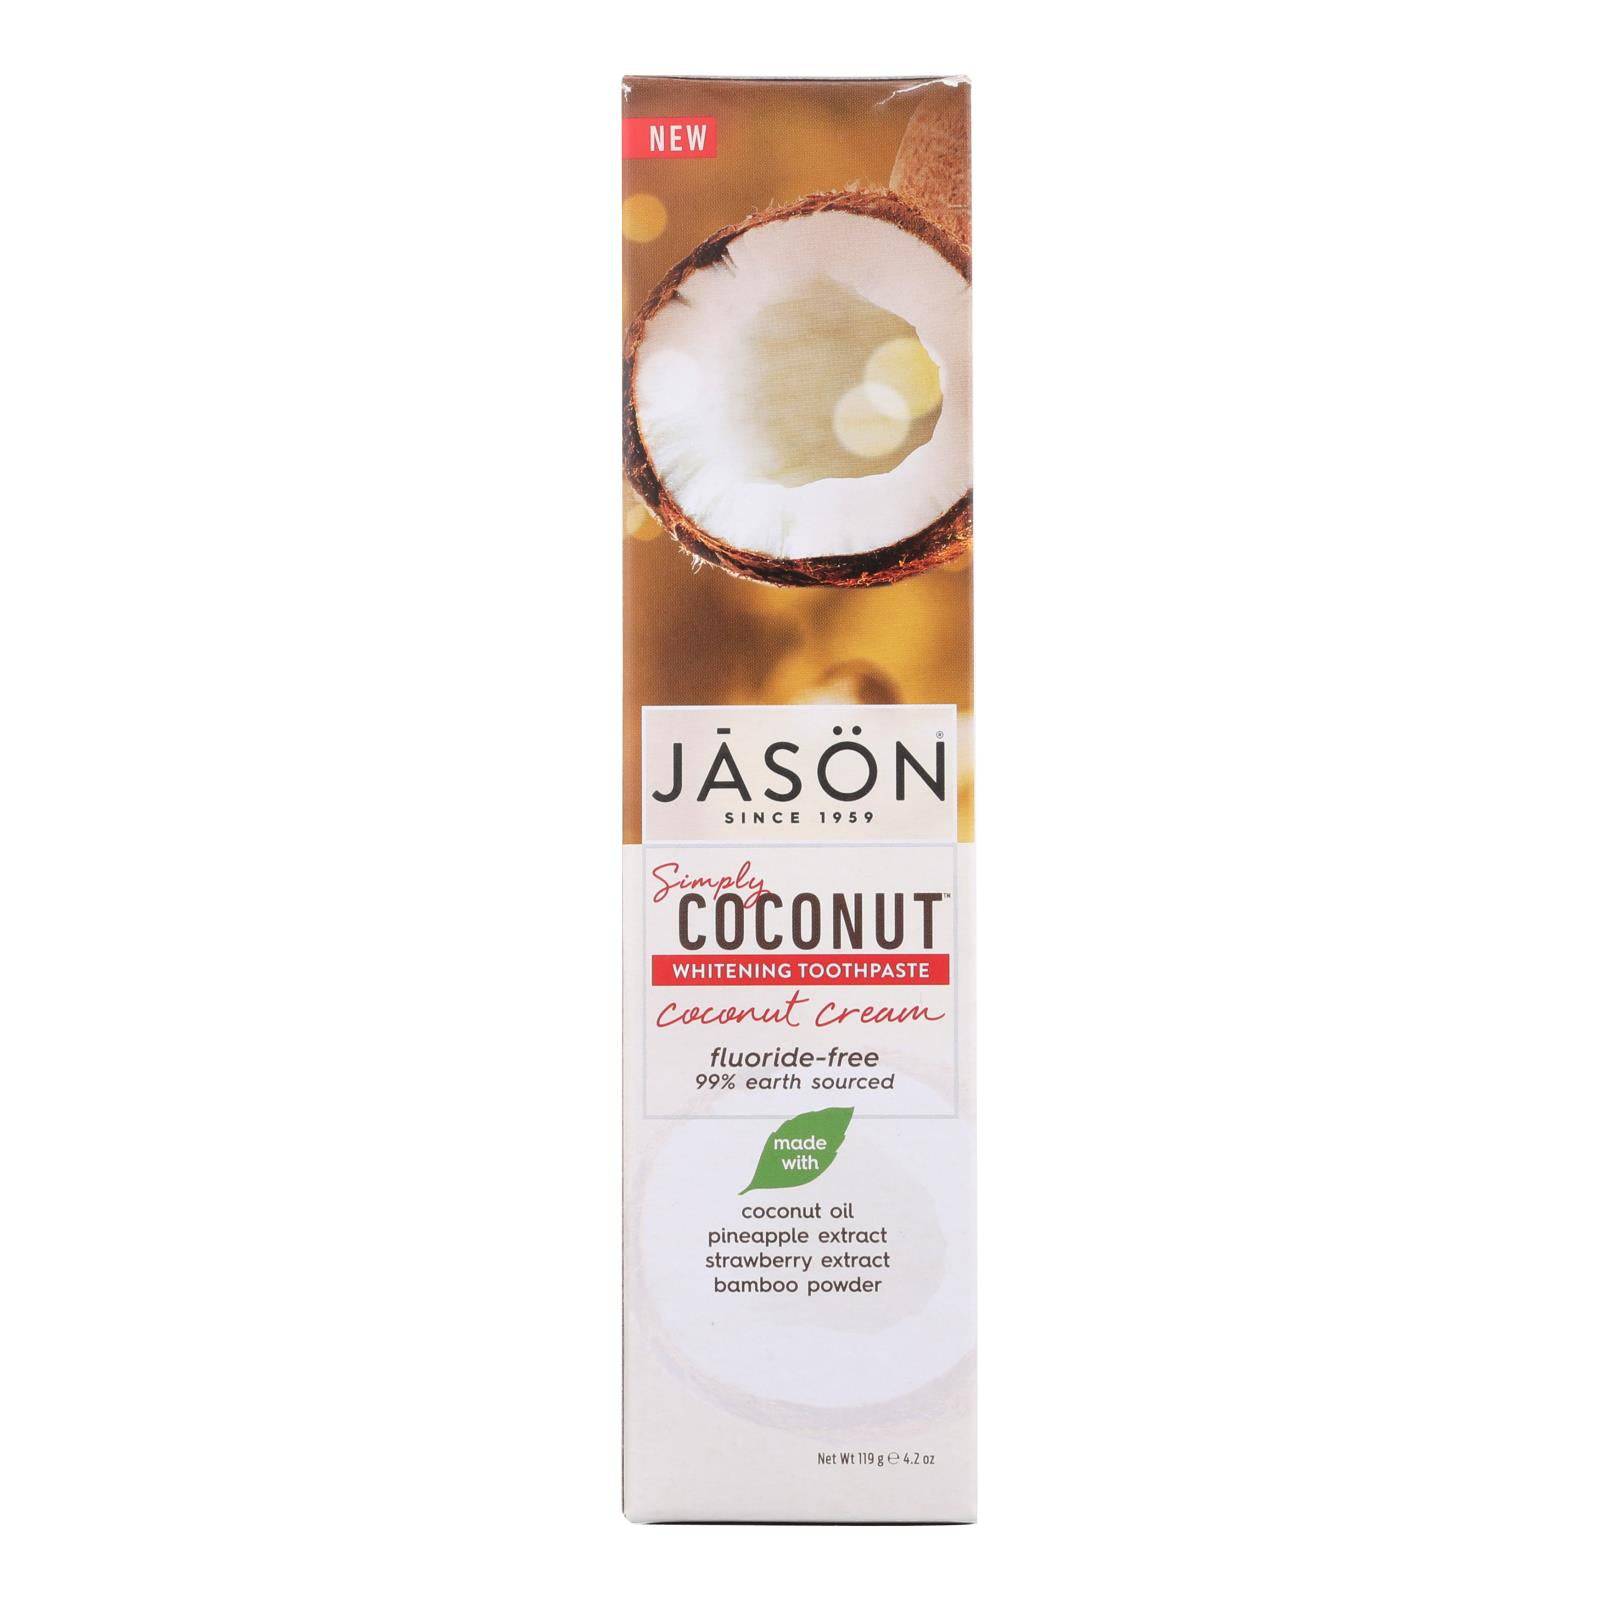 Buy Jason Natural Products Whitening Toothpaste - Coconut Cream - 4.2 Oz  at OnlyNaturals.us